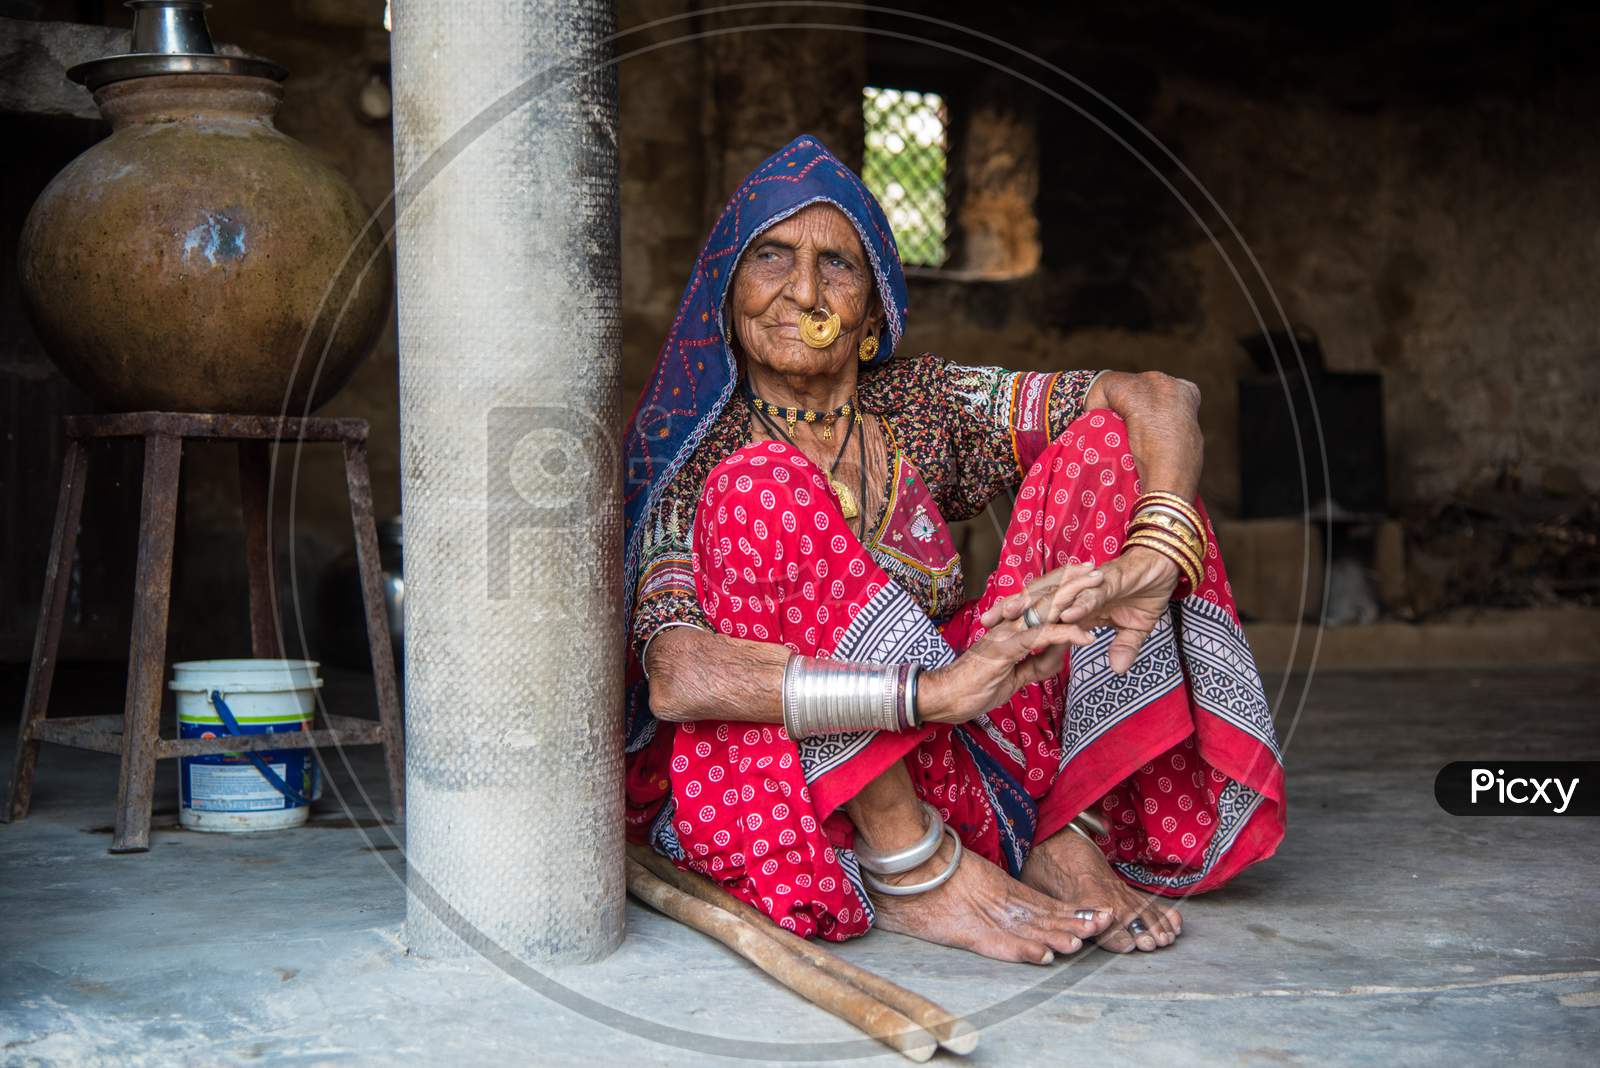 Portrait of an Indian woman traditionally dressed.